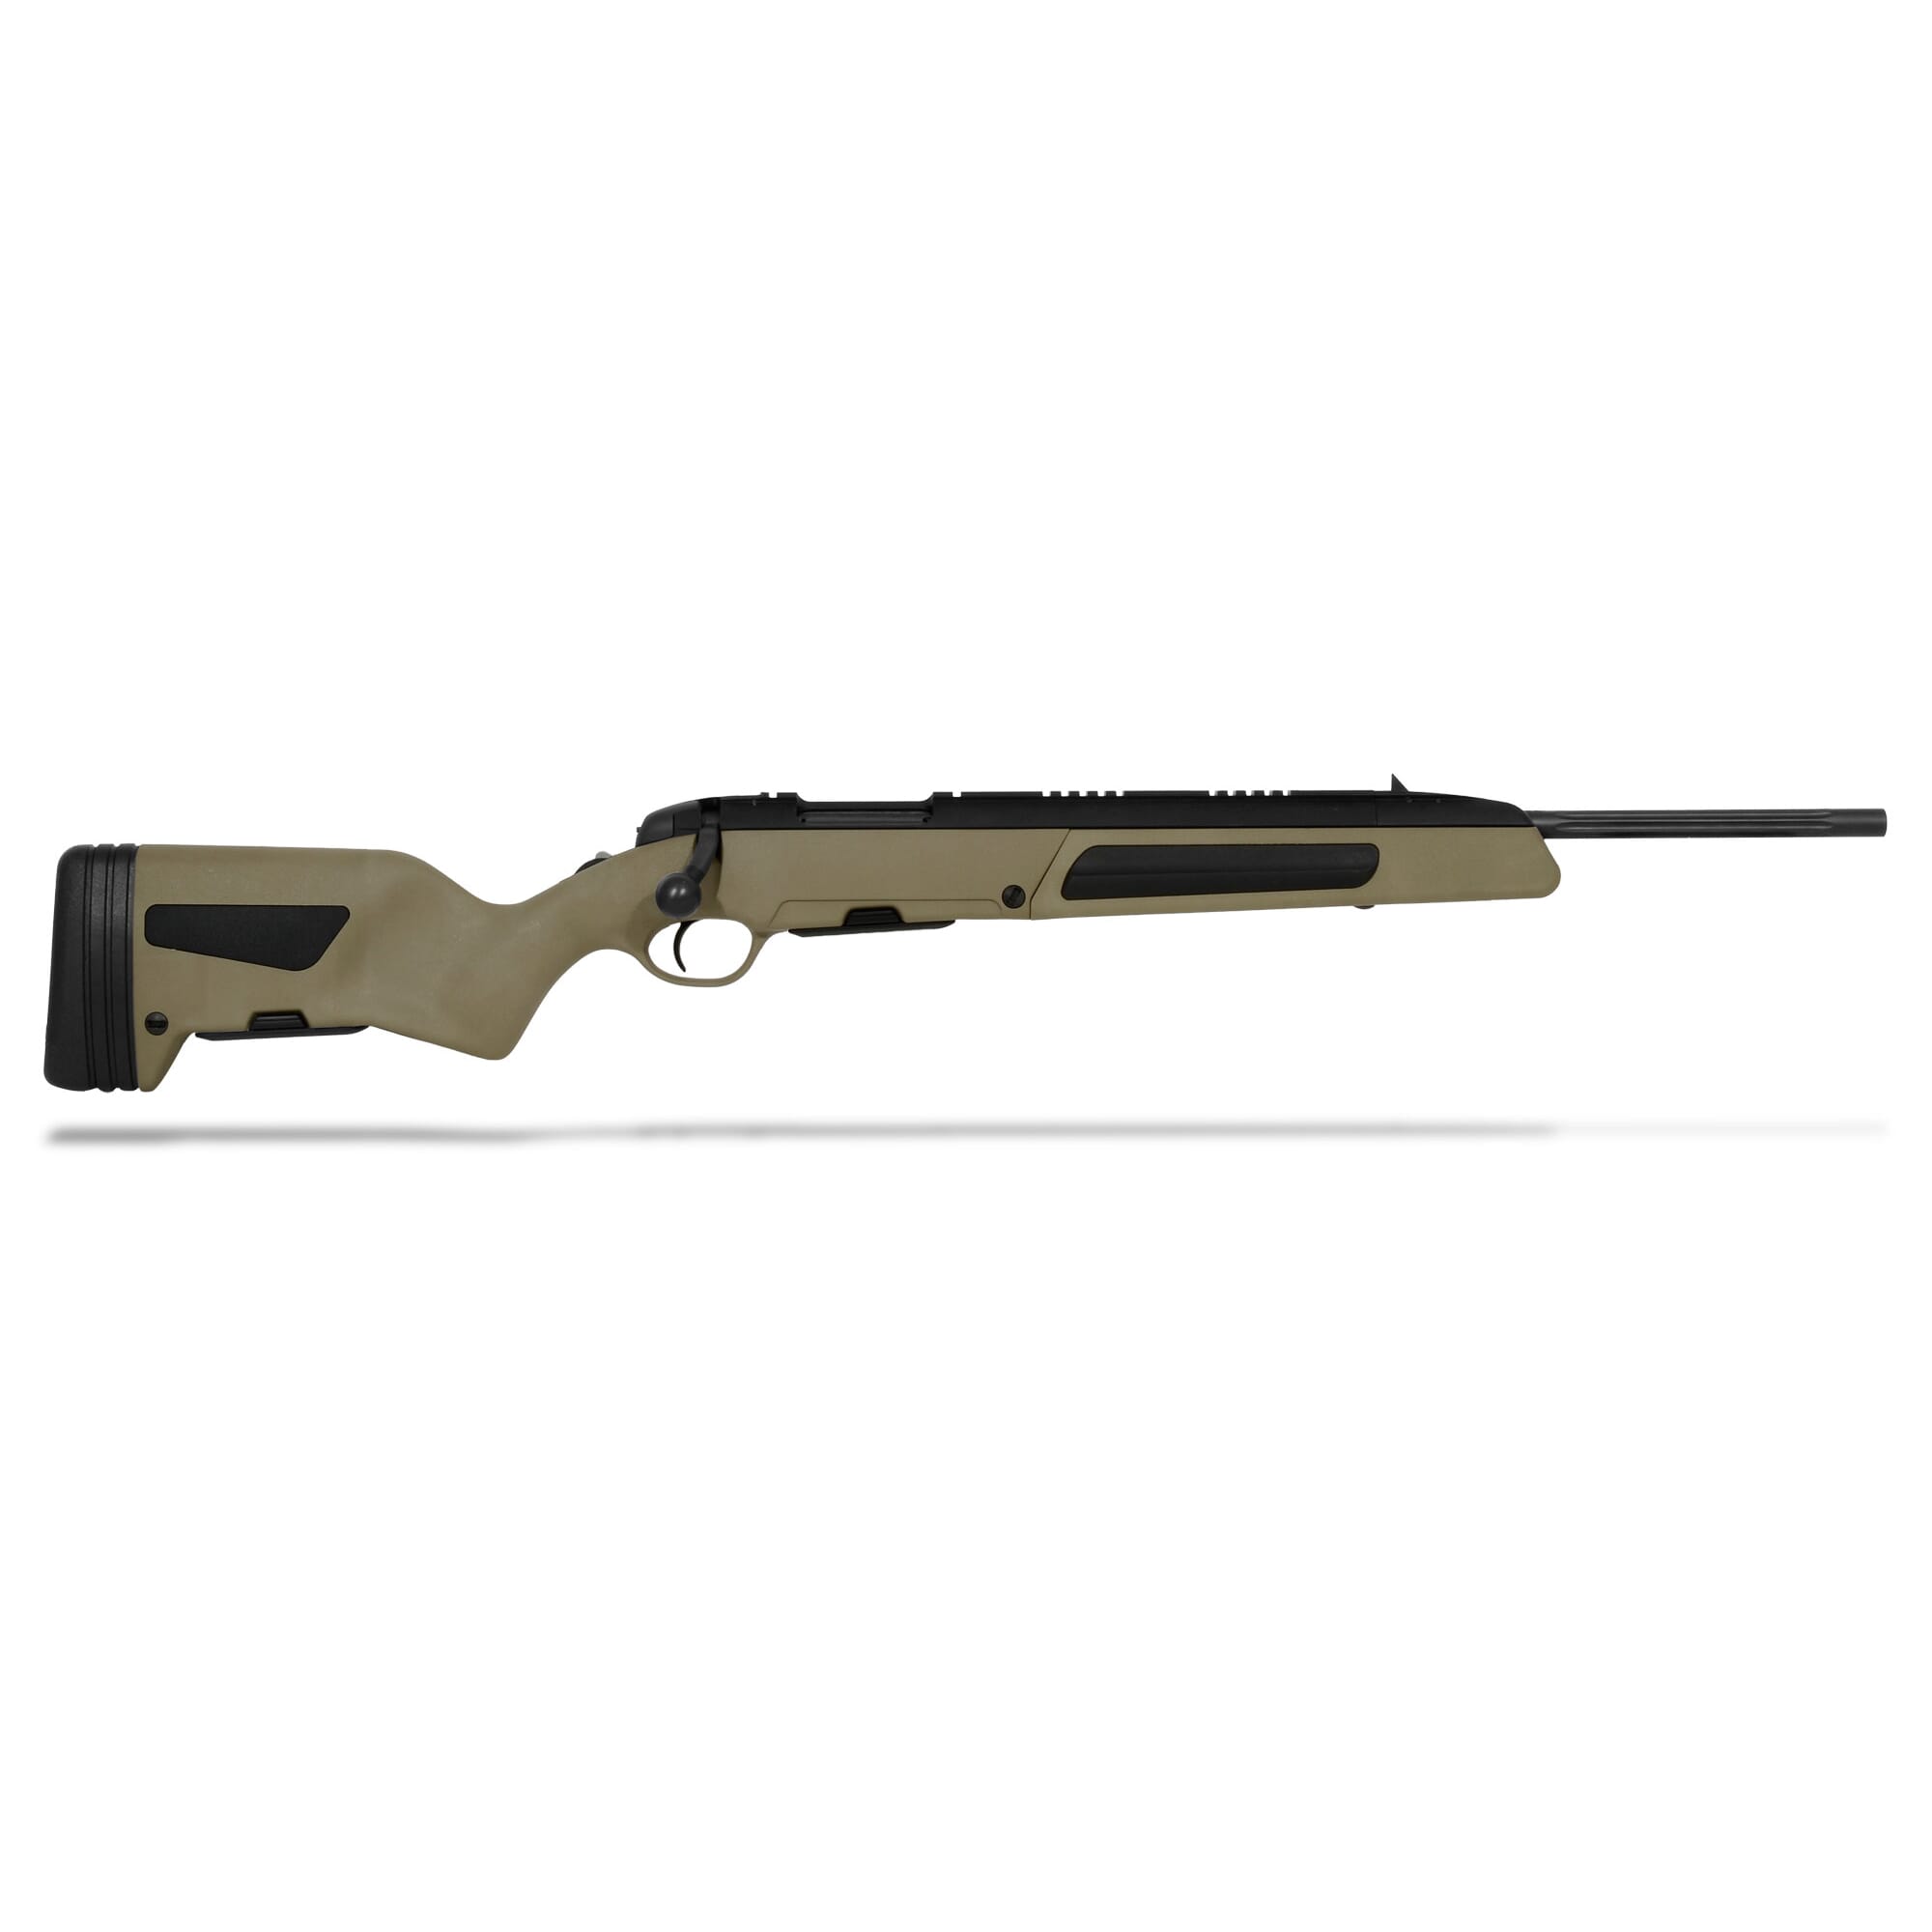 Steyr Scout .308 Win. Mud Rifle 26-346-3M